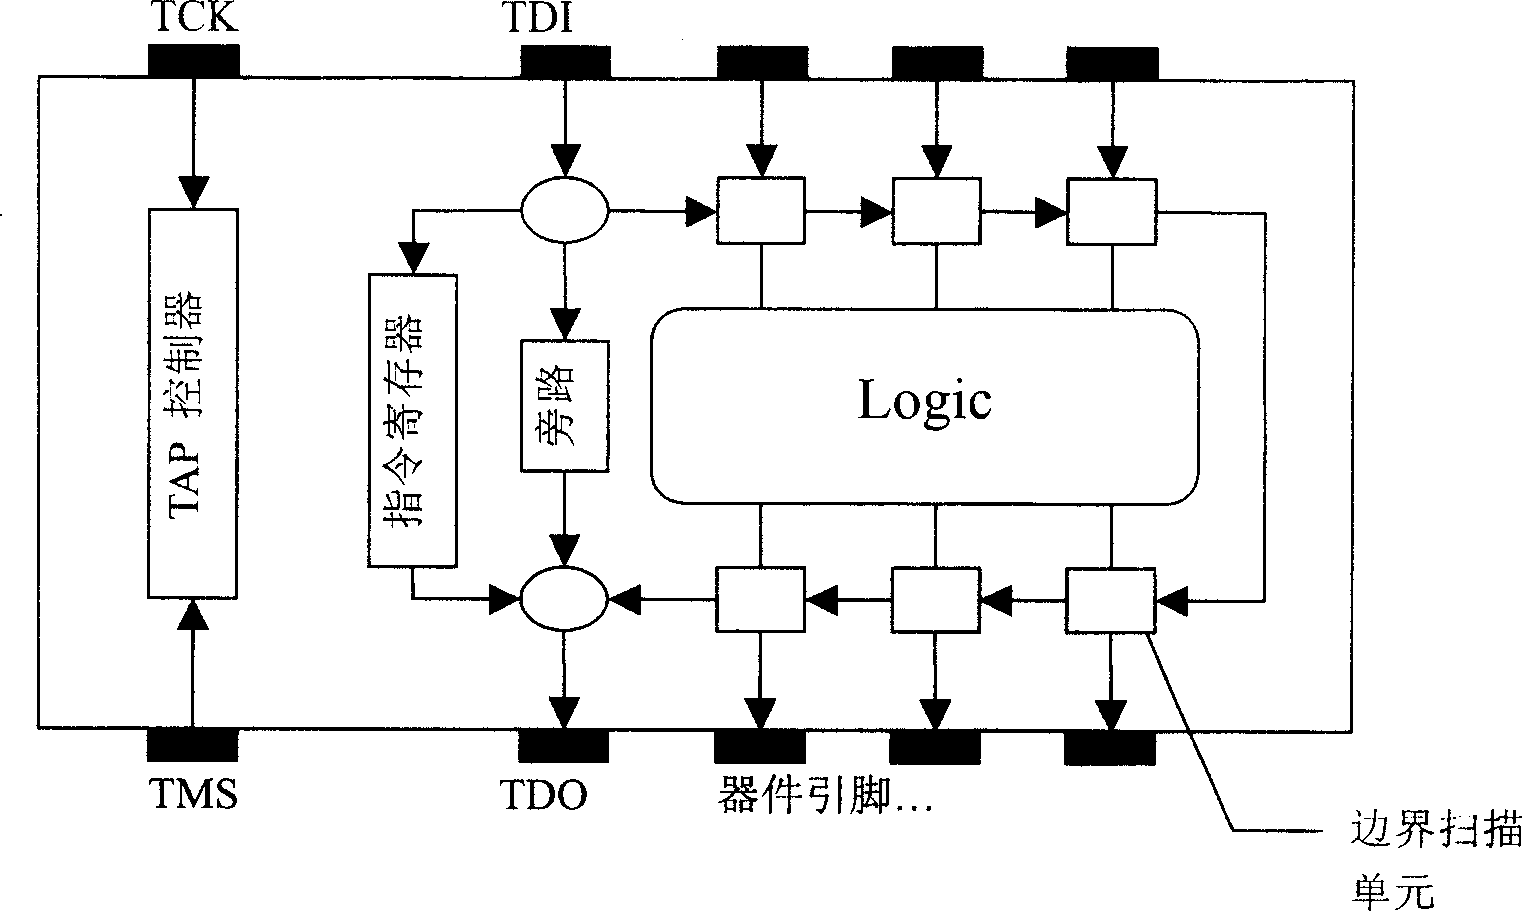 Method for checking software edition in programmable logic element